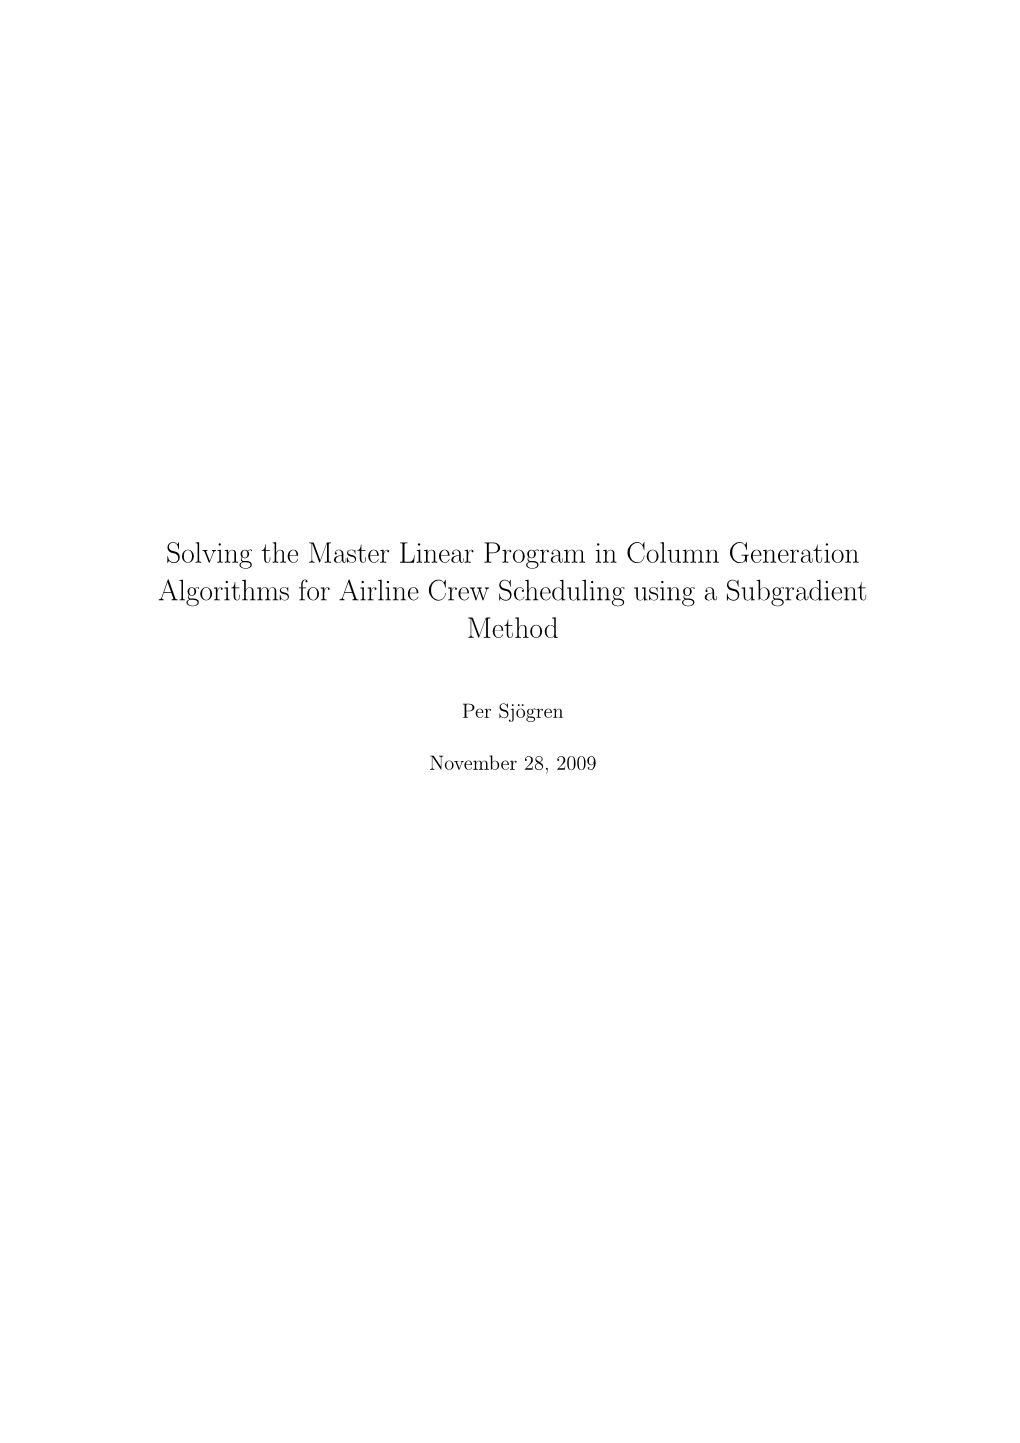 Solving the Master Linear Program in Column Generation Algorithms for Airline Crew Scheduling Using a Subgradient Method